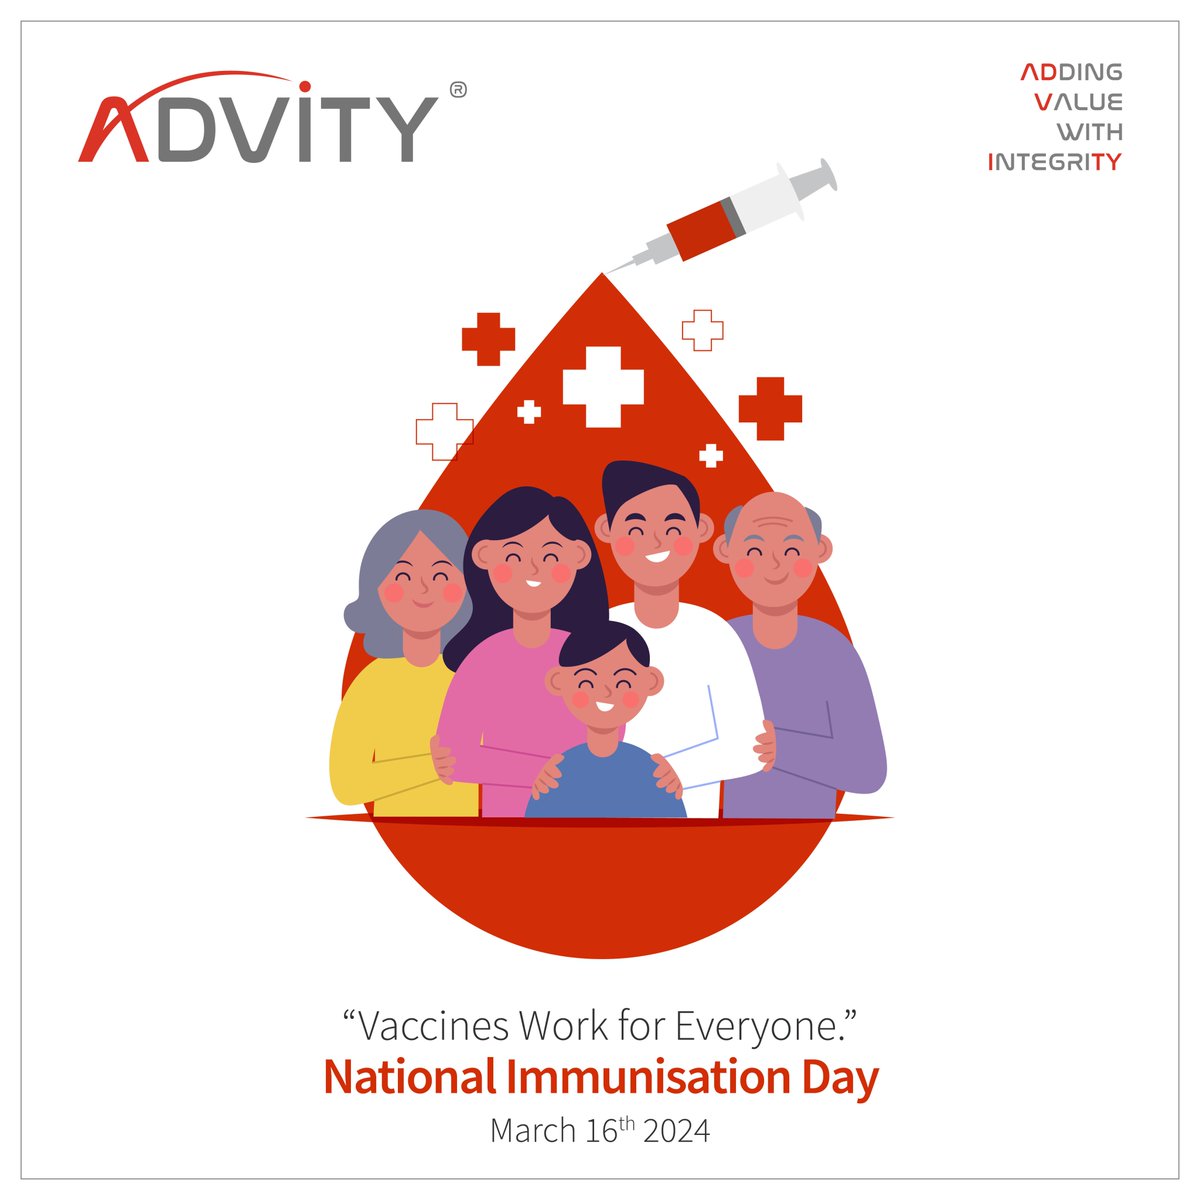 Let's protect our future!
Join us in spreading awareness and encouraging everyone to get vaccinated. Together, we can make a difference and build a healthier, safer world for generations to come.

#NationalImmunizationDay #VaccinesSaveLives #ProtectOurFuture #HealthForAll